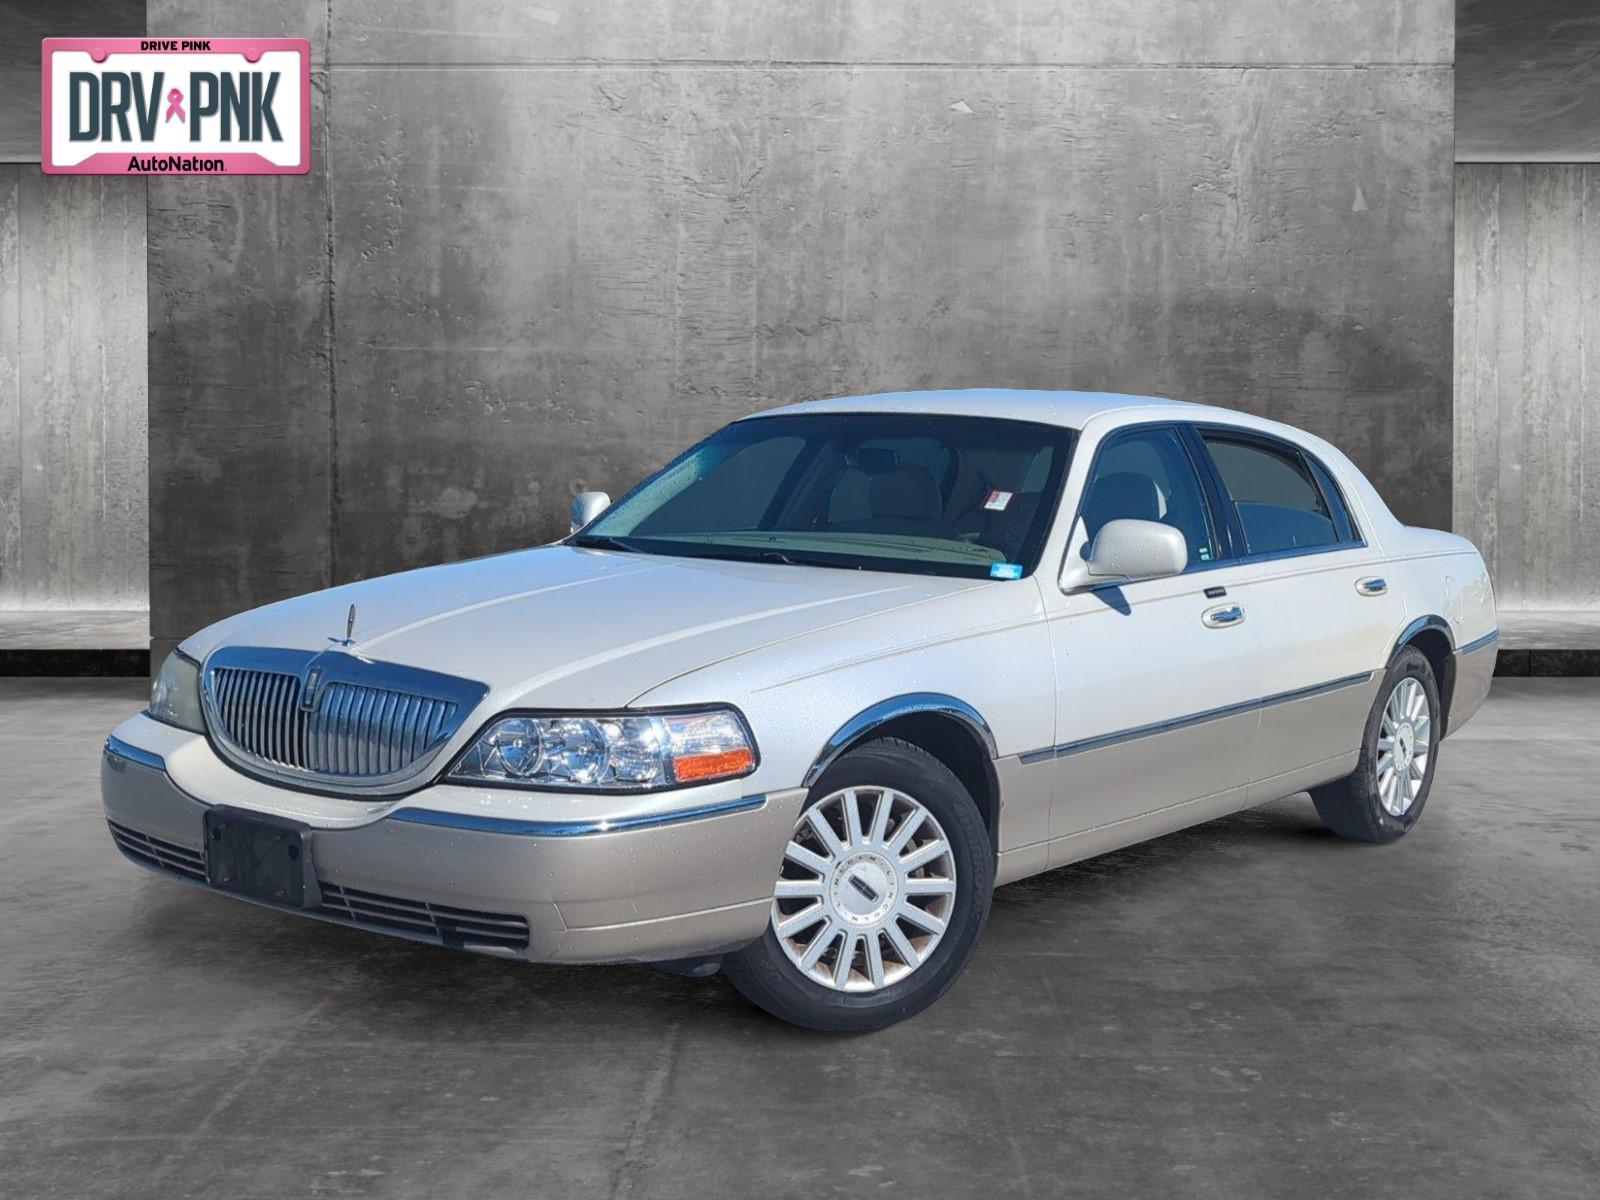 2006 Lincoln Town Car Vehicle Photo in Winter Park, FL 32792